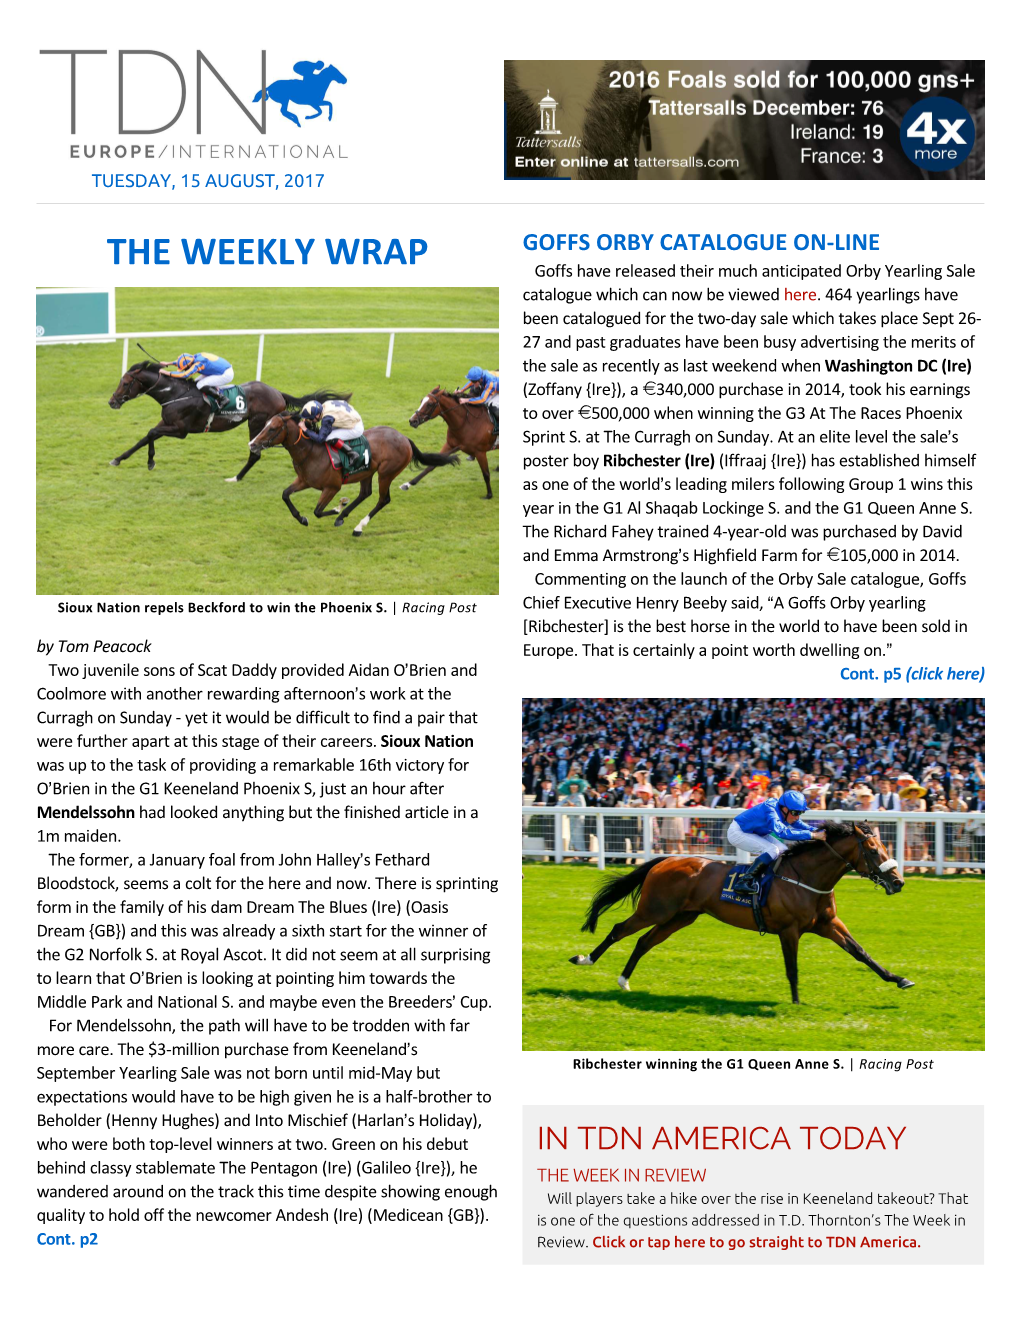 THE WEEKLY WRAP Goffs Have Released Their Much Anticipated Orby Yearling Sale Catalogue Which Can Now Be Viewed Here